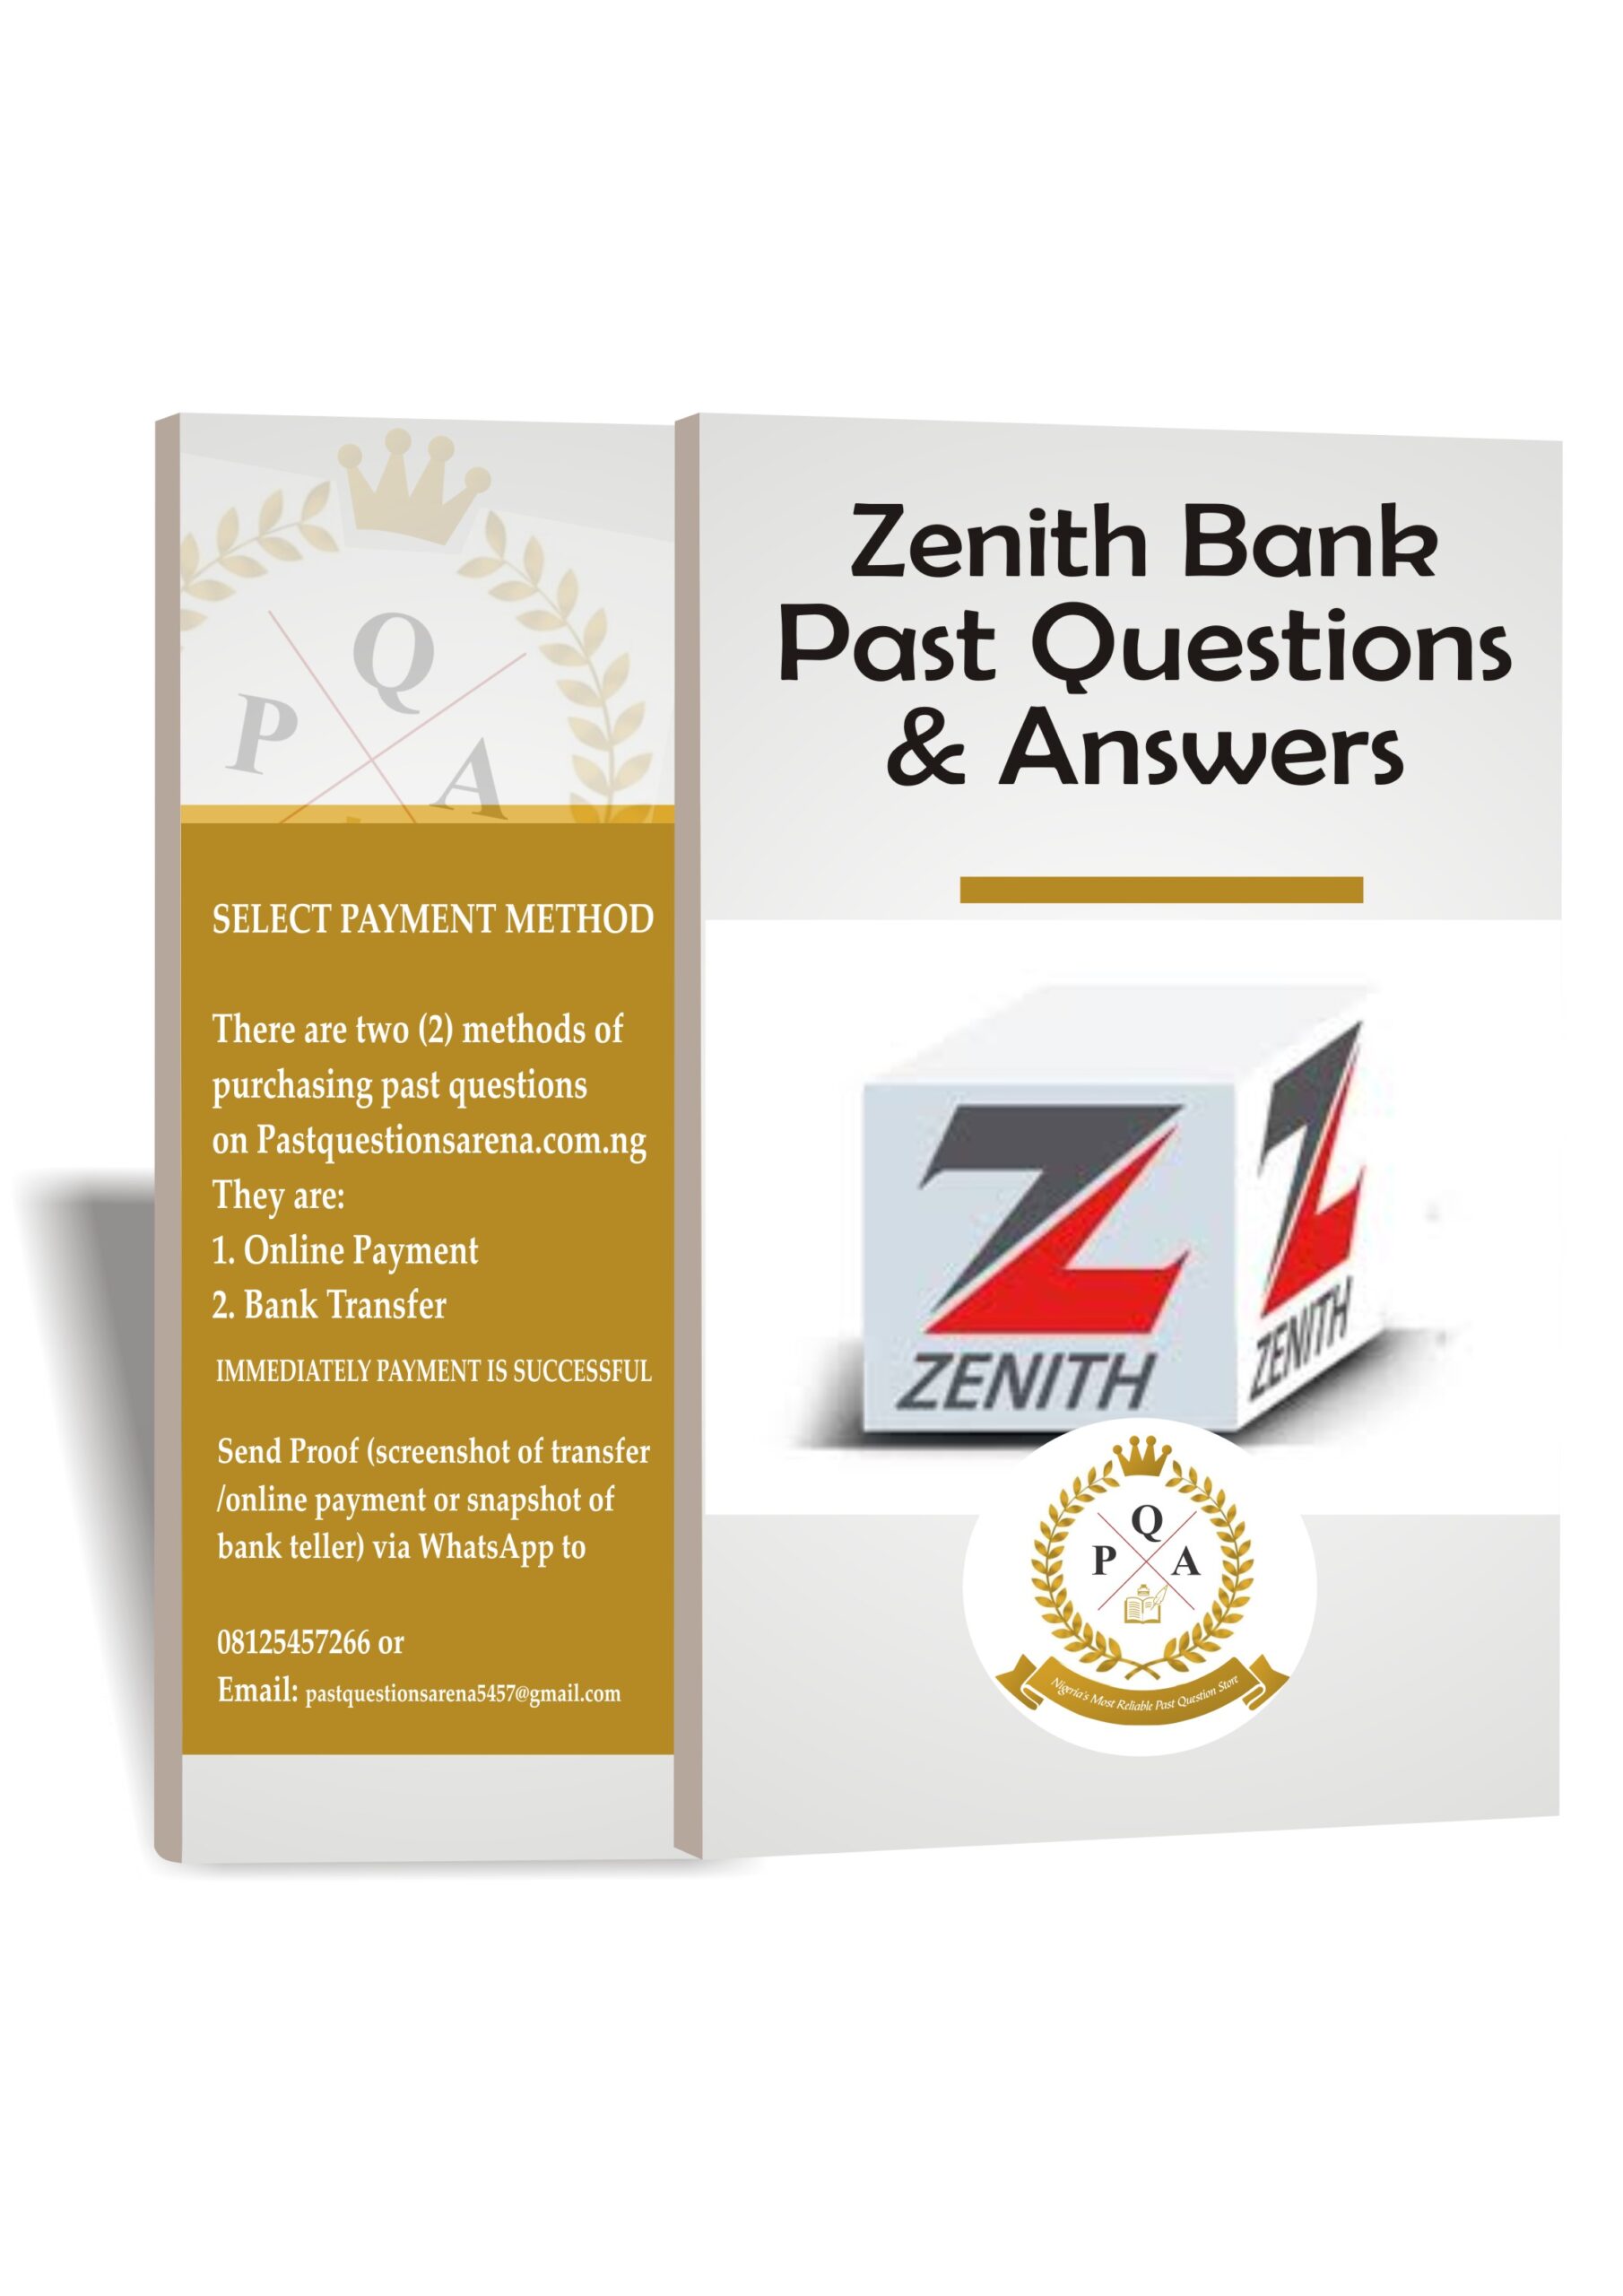 14-key-test-of-zenith-bank-archives-past-questions-arena